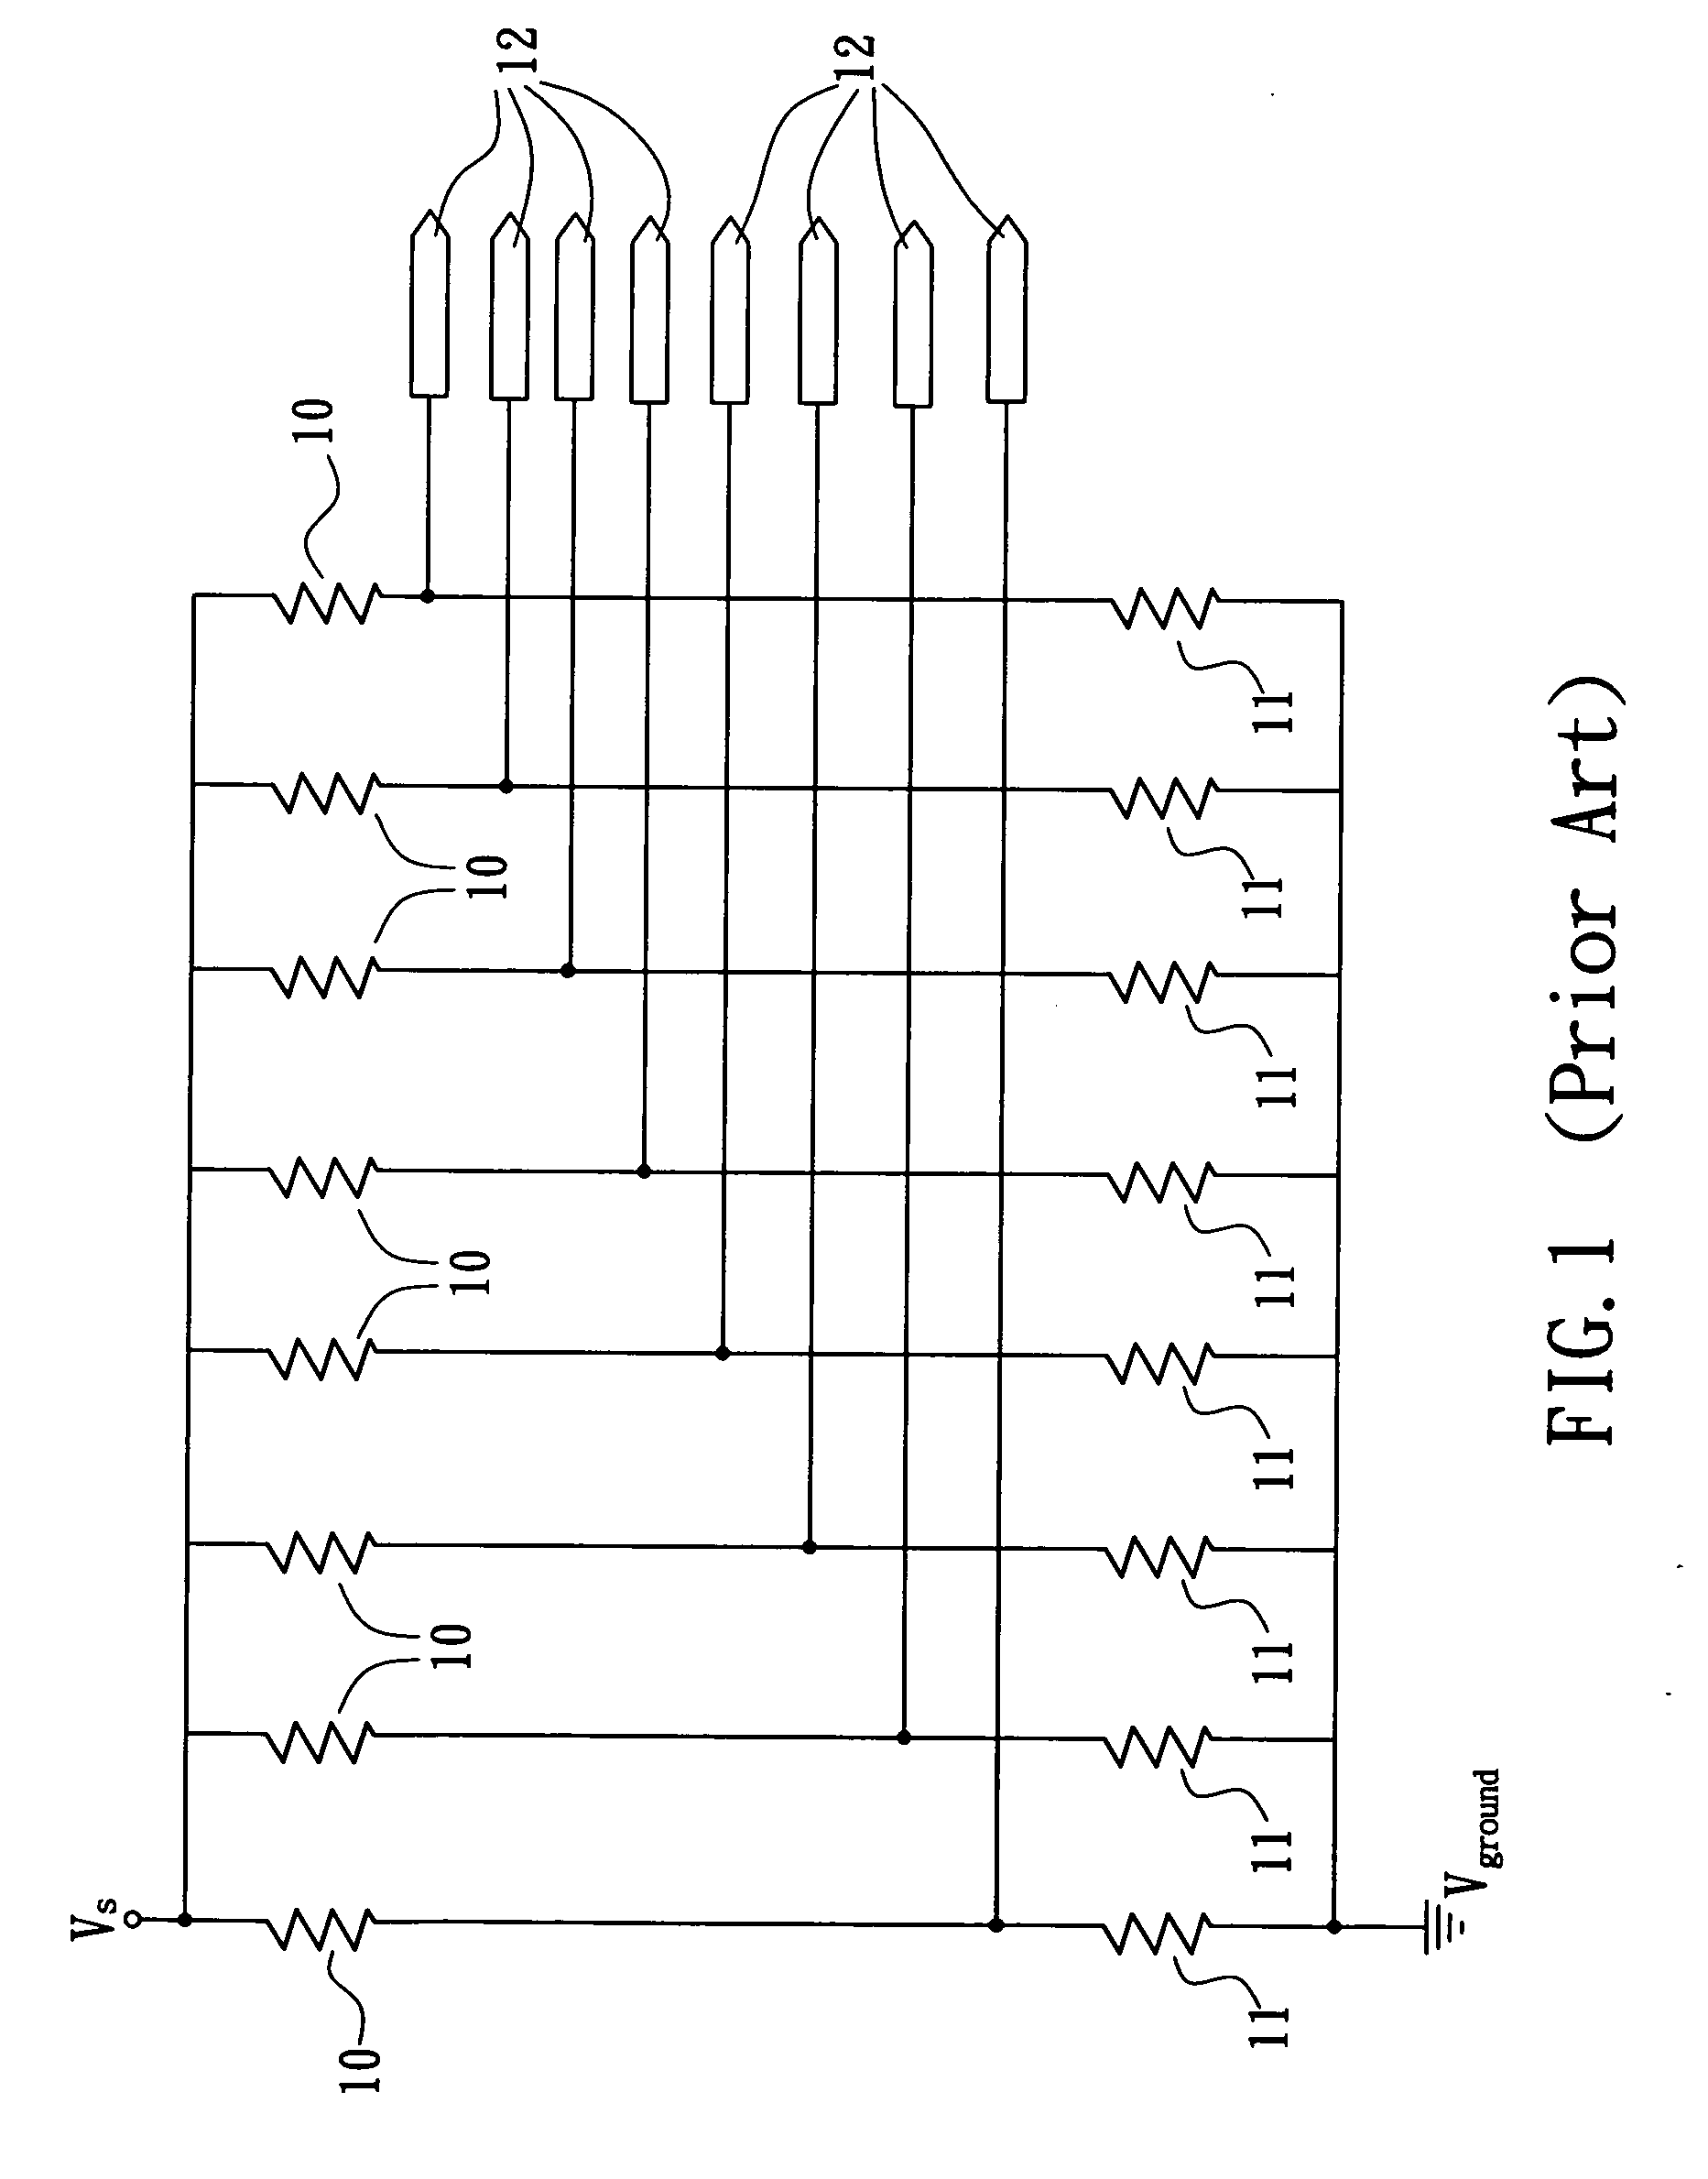 Electronic circuit structure using an analog-to-digital conversion concept for saving circuit pins